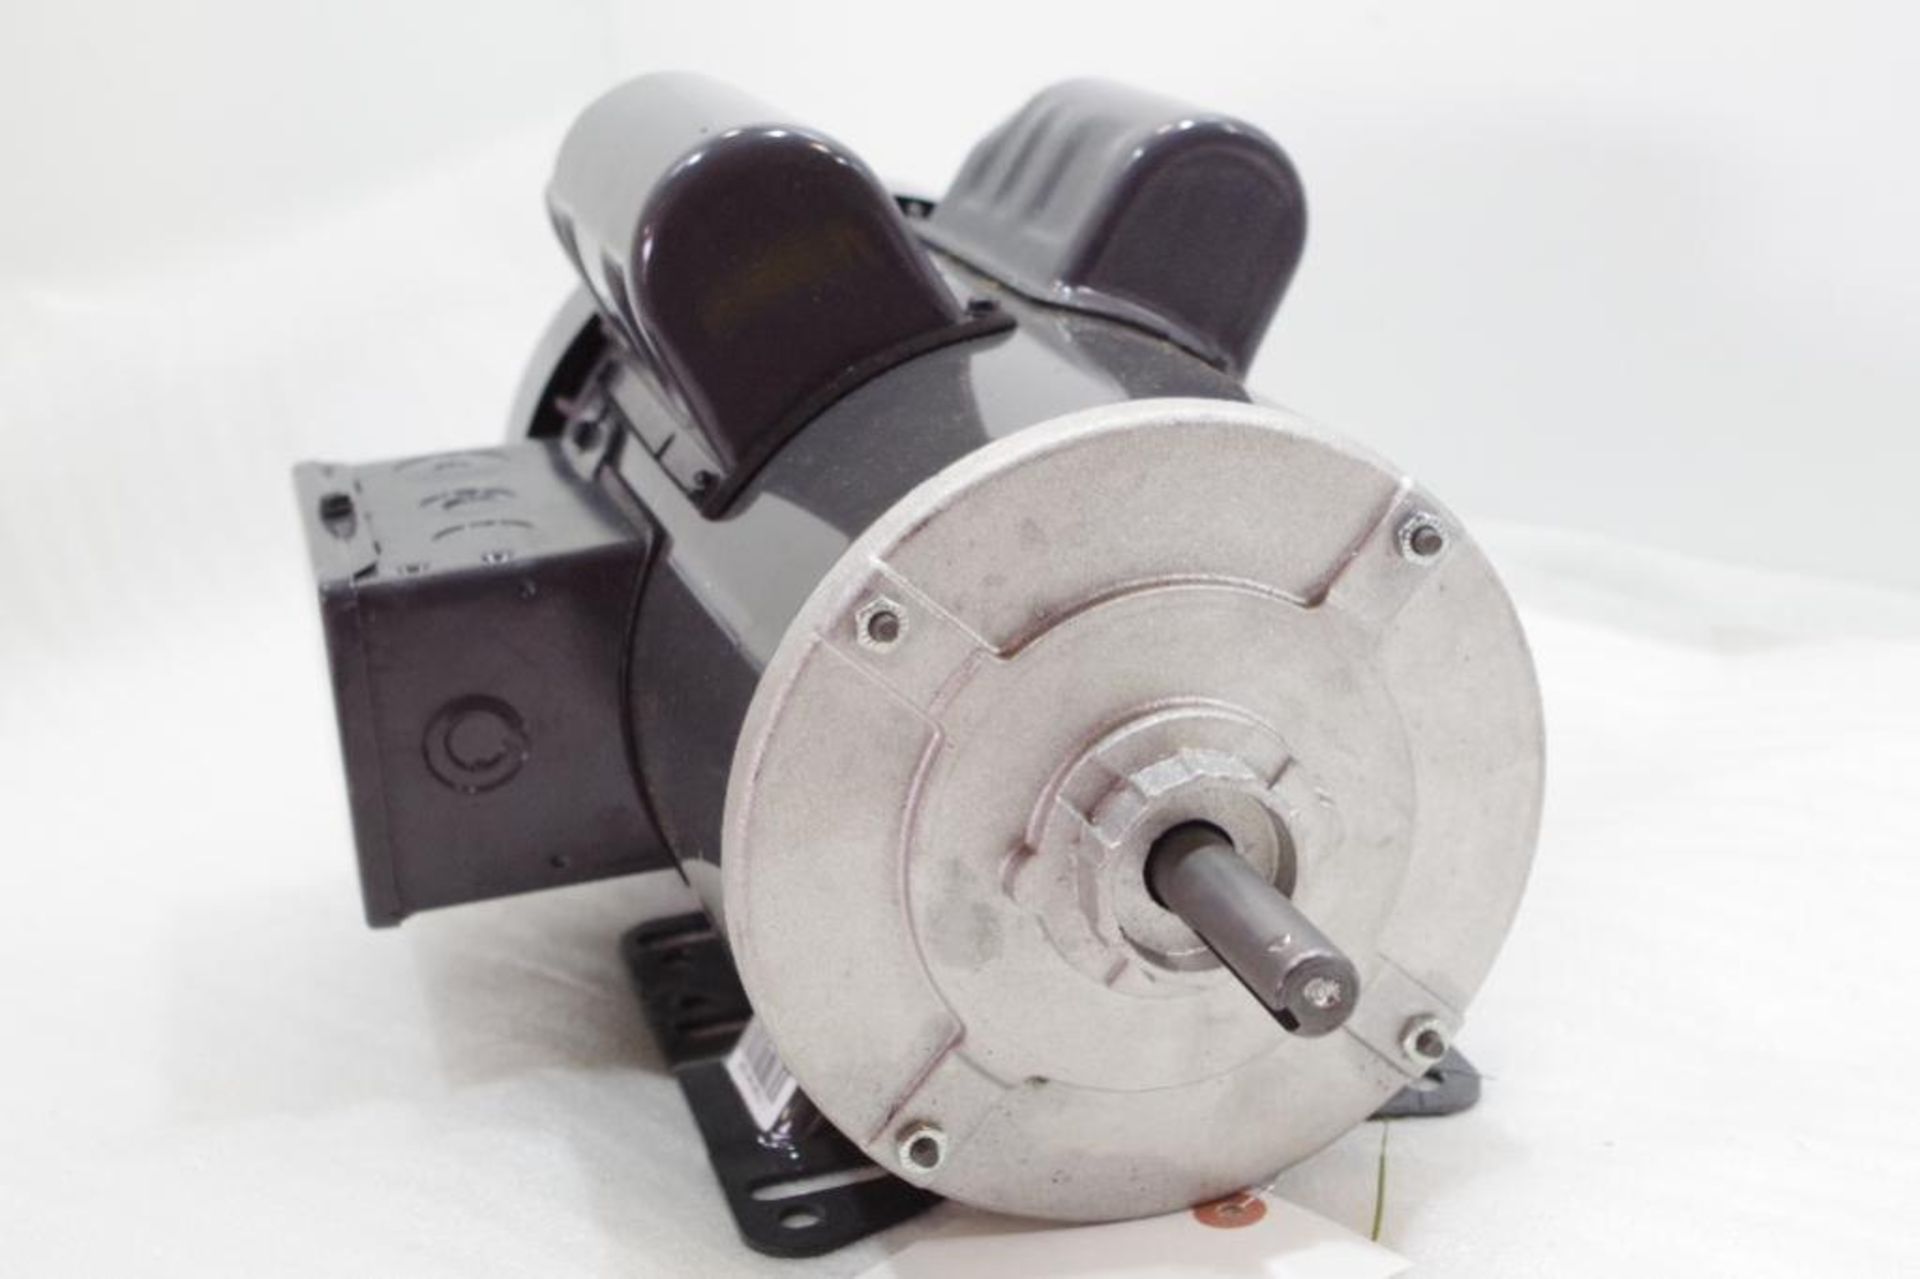 DAYTON Industrial Motor, 2 HP, 1725 RPM, 1 PH (condition unknown) - Image 3 of 3